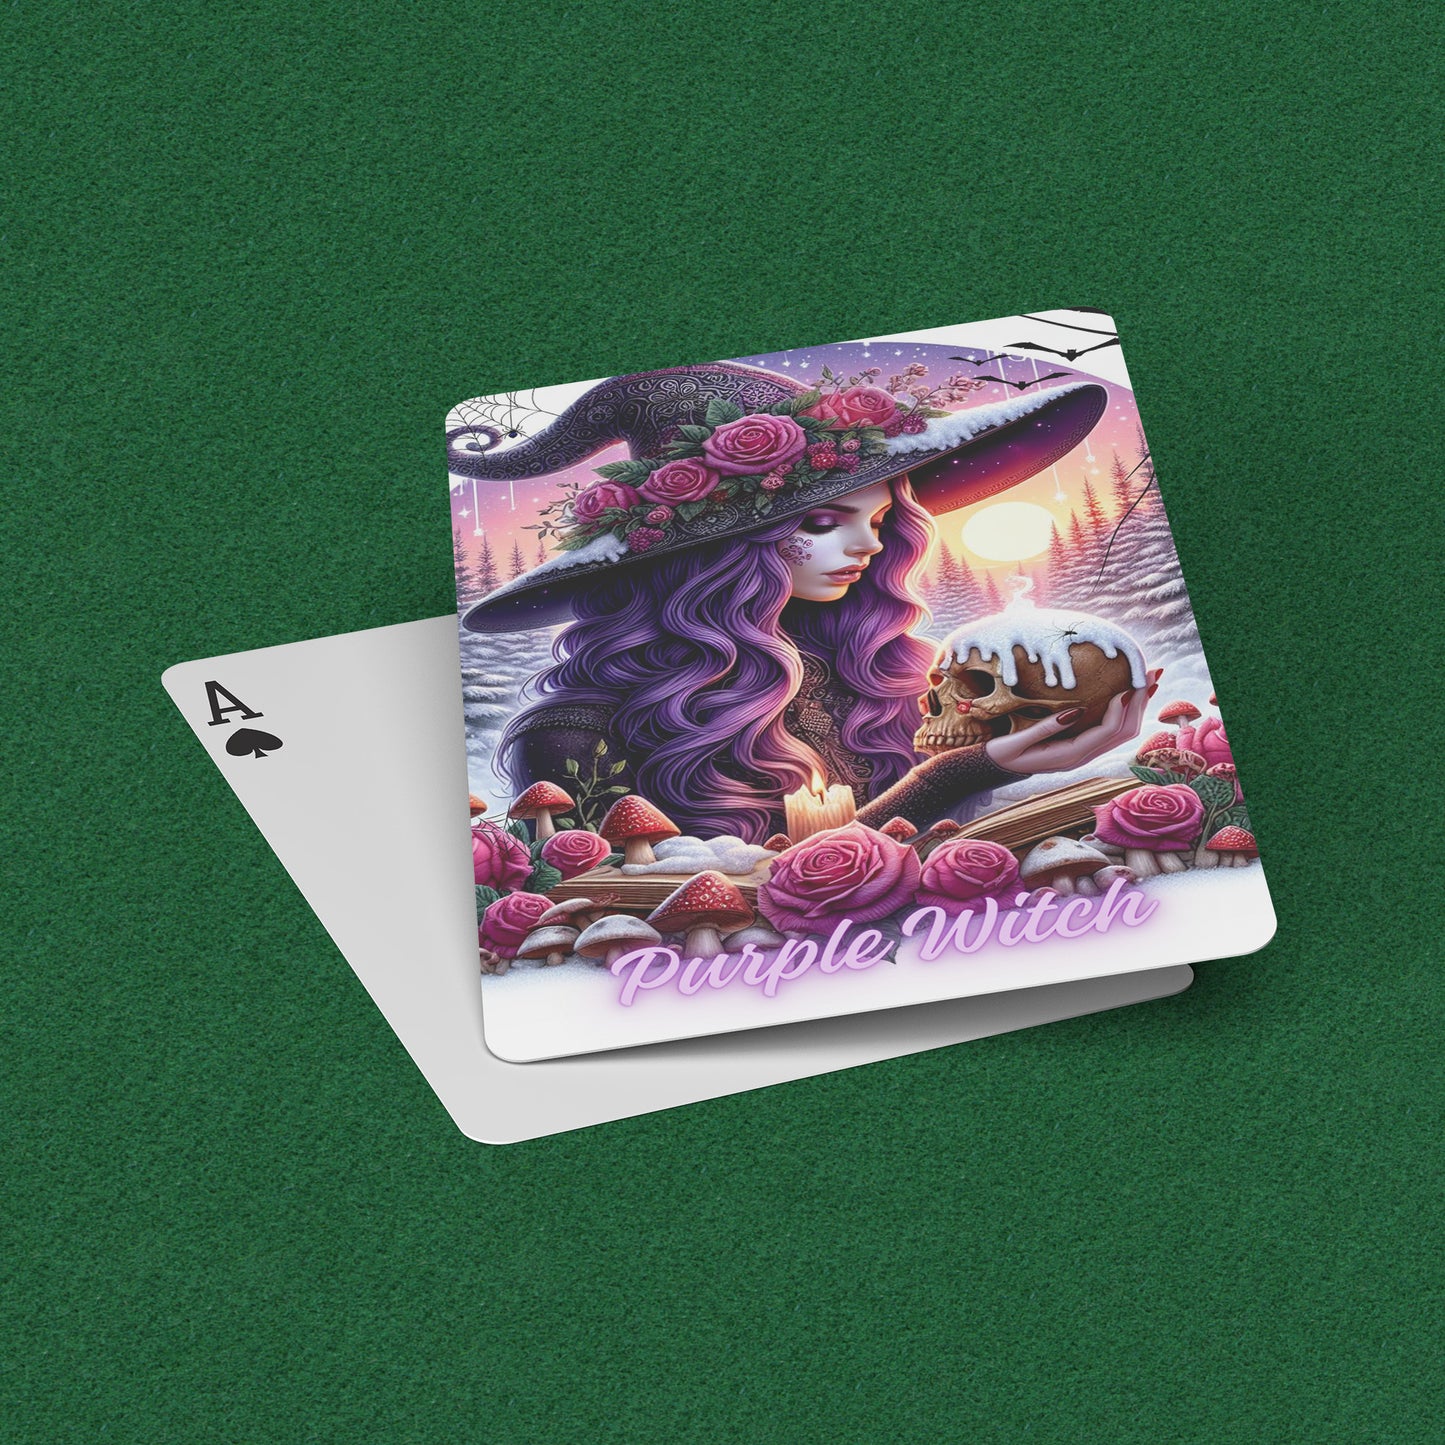 Purple Witch Playing Cards - Standard Poker Deck, Limited Edition